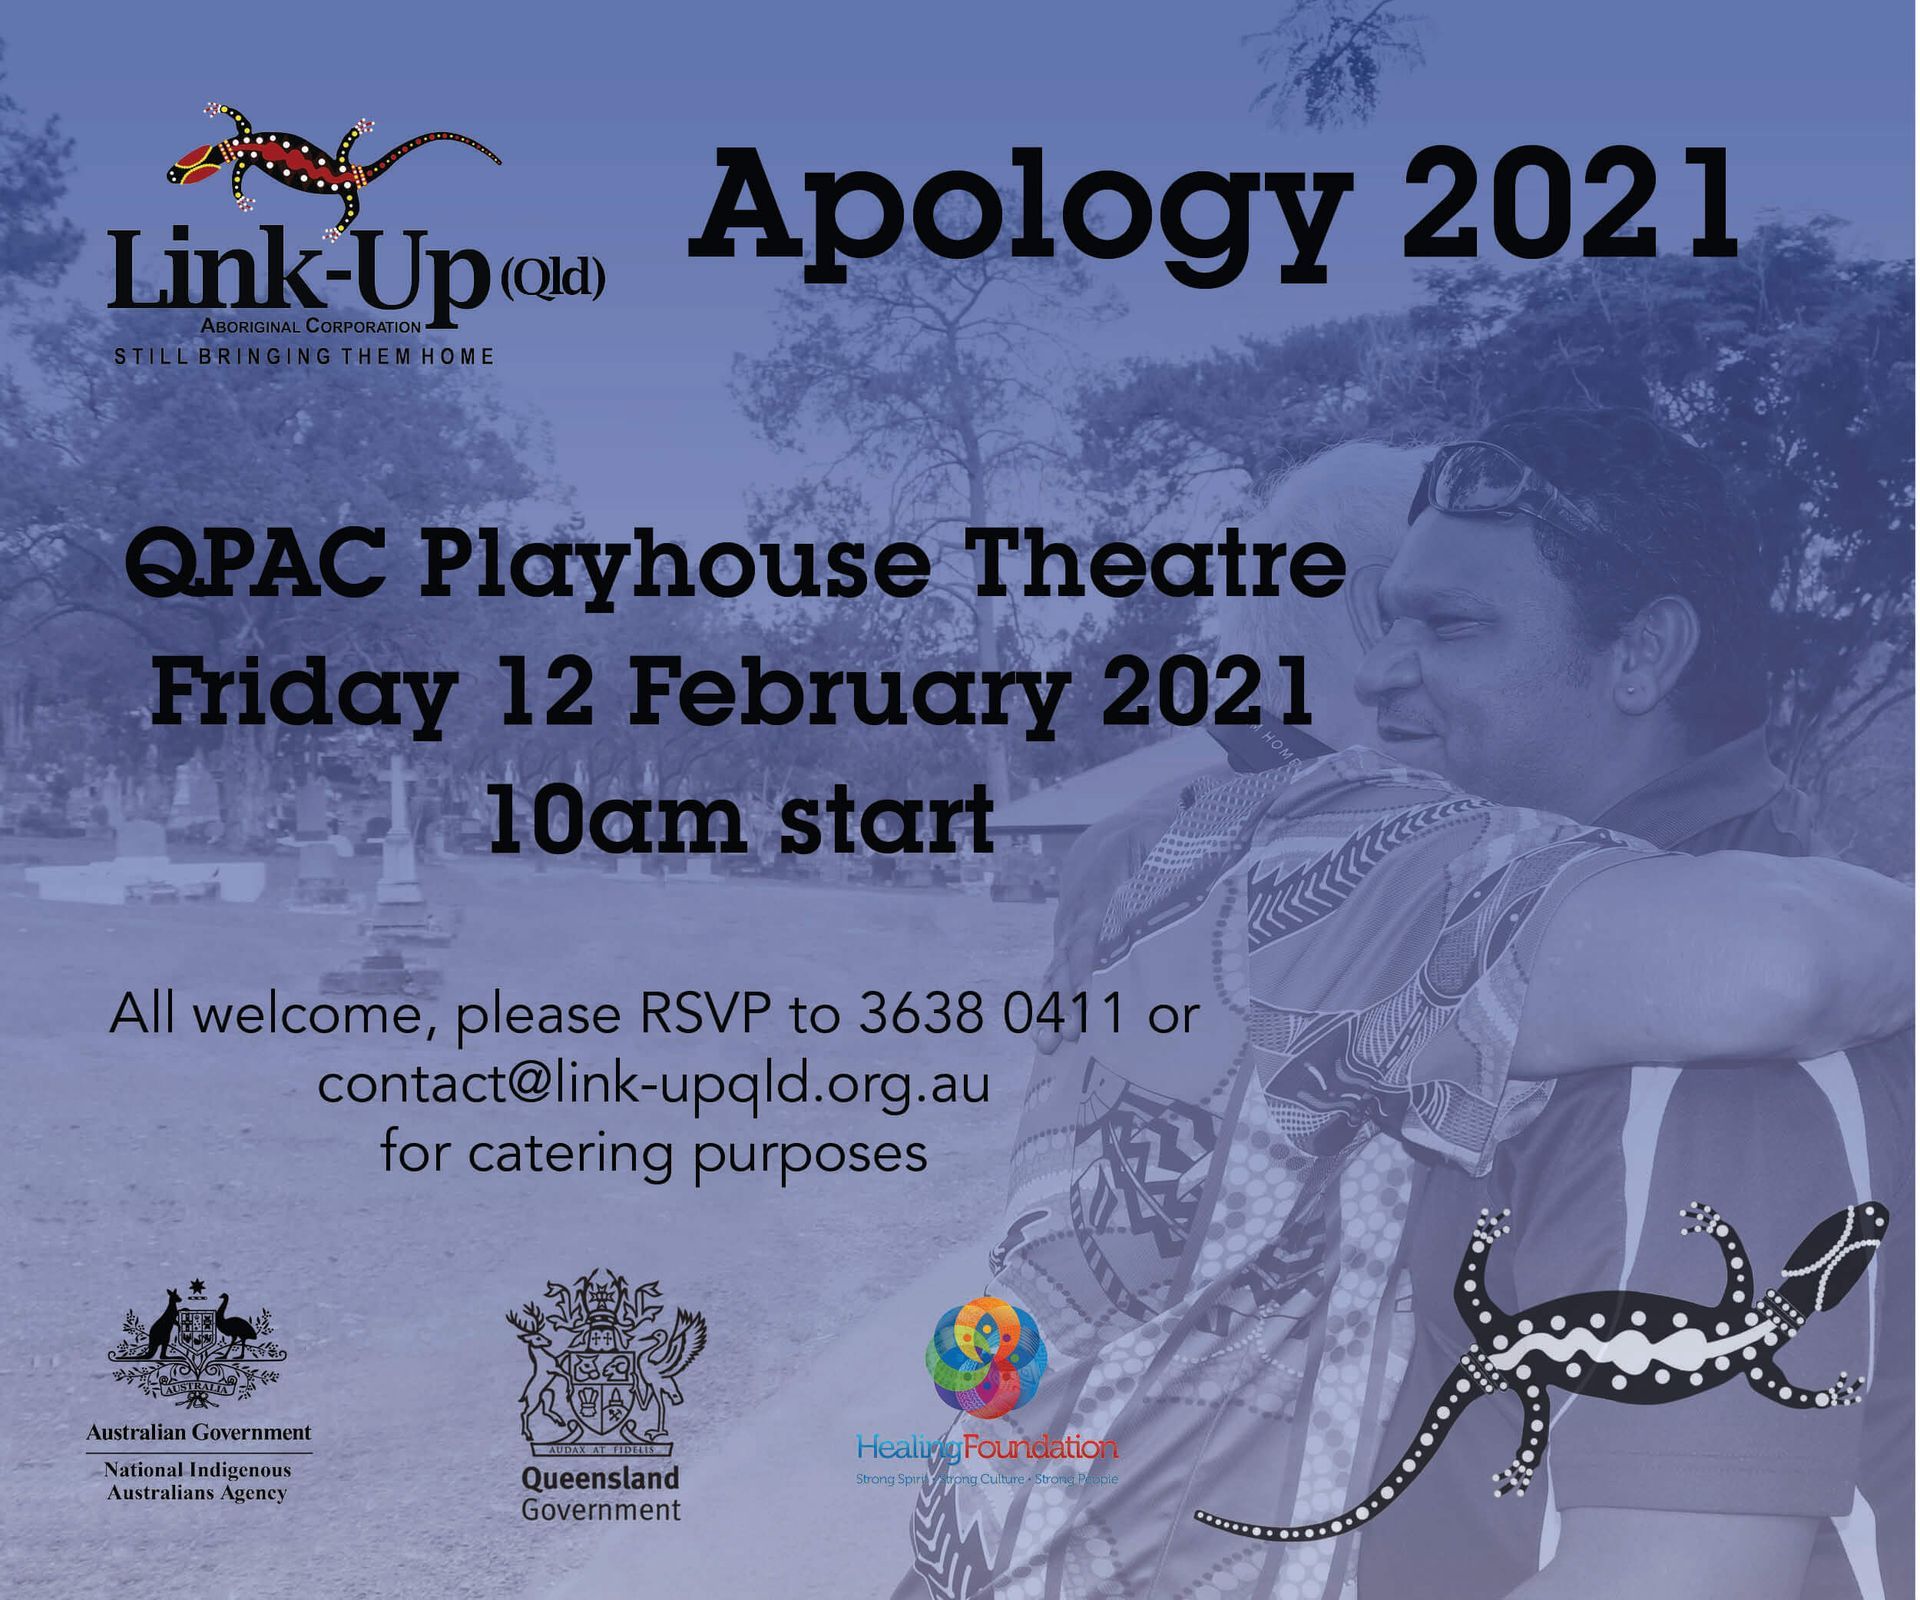 Fortrolig overgive lysere Anniversary of the National Apology 2021 - Link-Up (Qld)